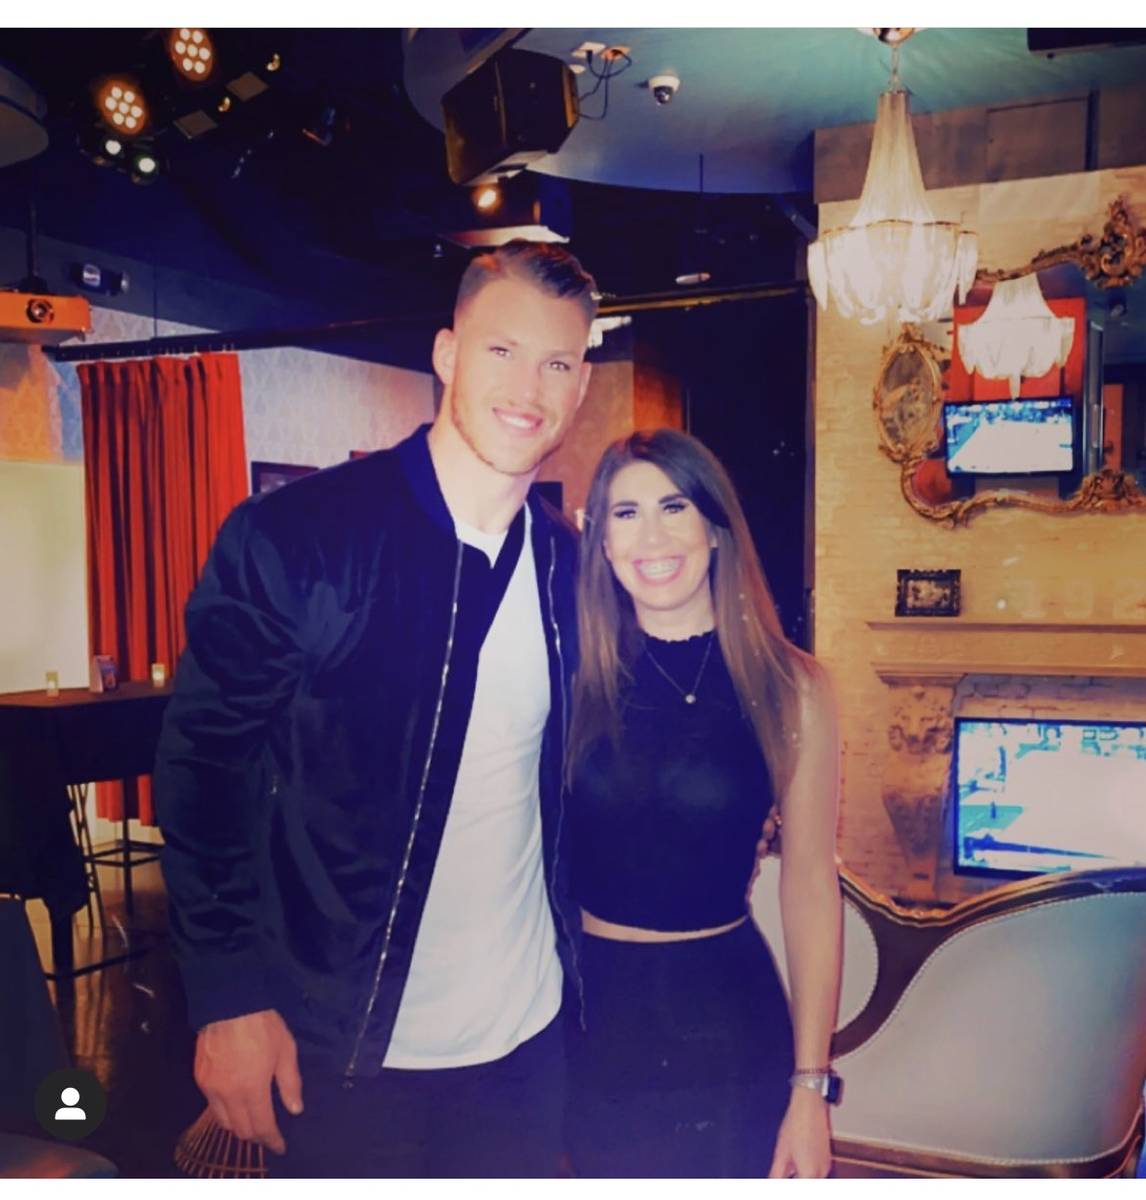 New York Giants tight end Kyle Rudolph is shown with 1923 Prohibition Bar manager Michaela Latt ...